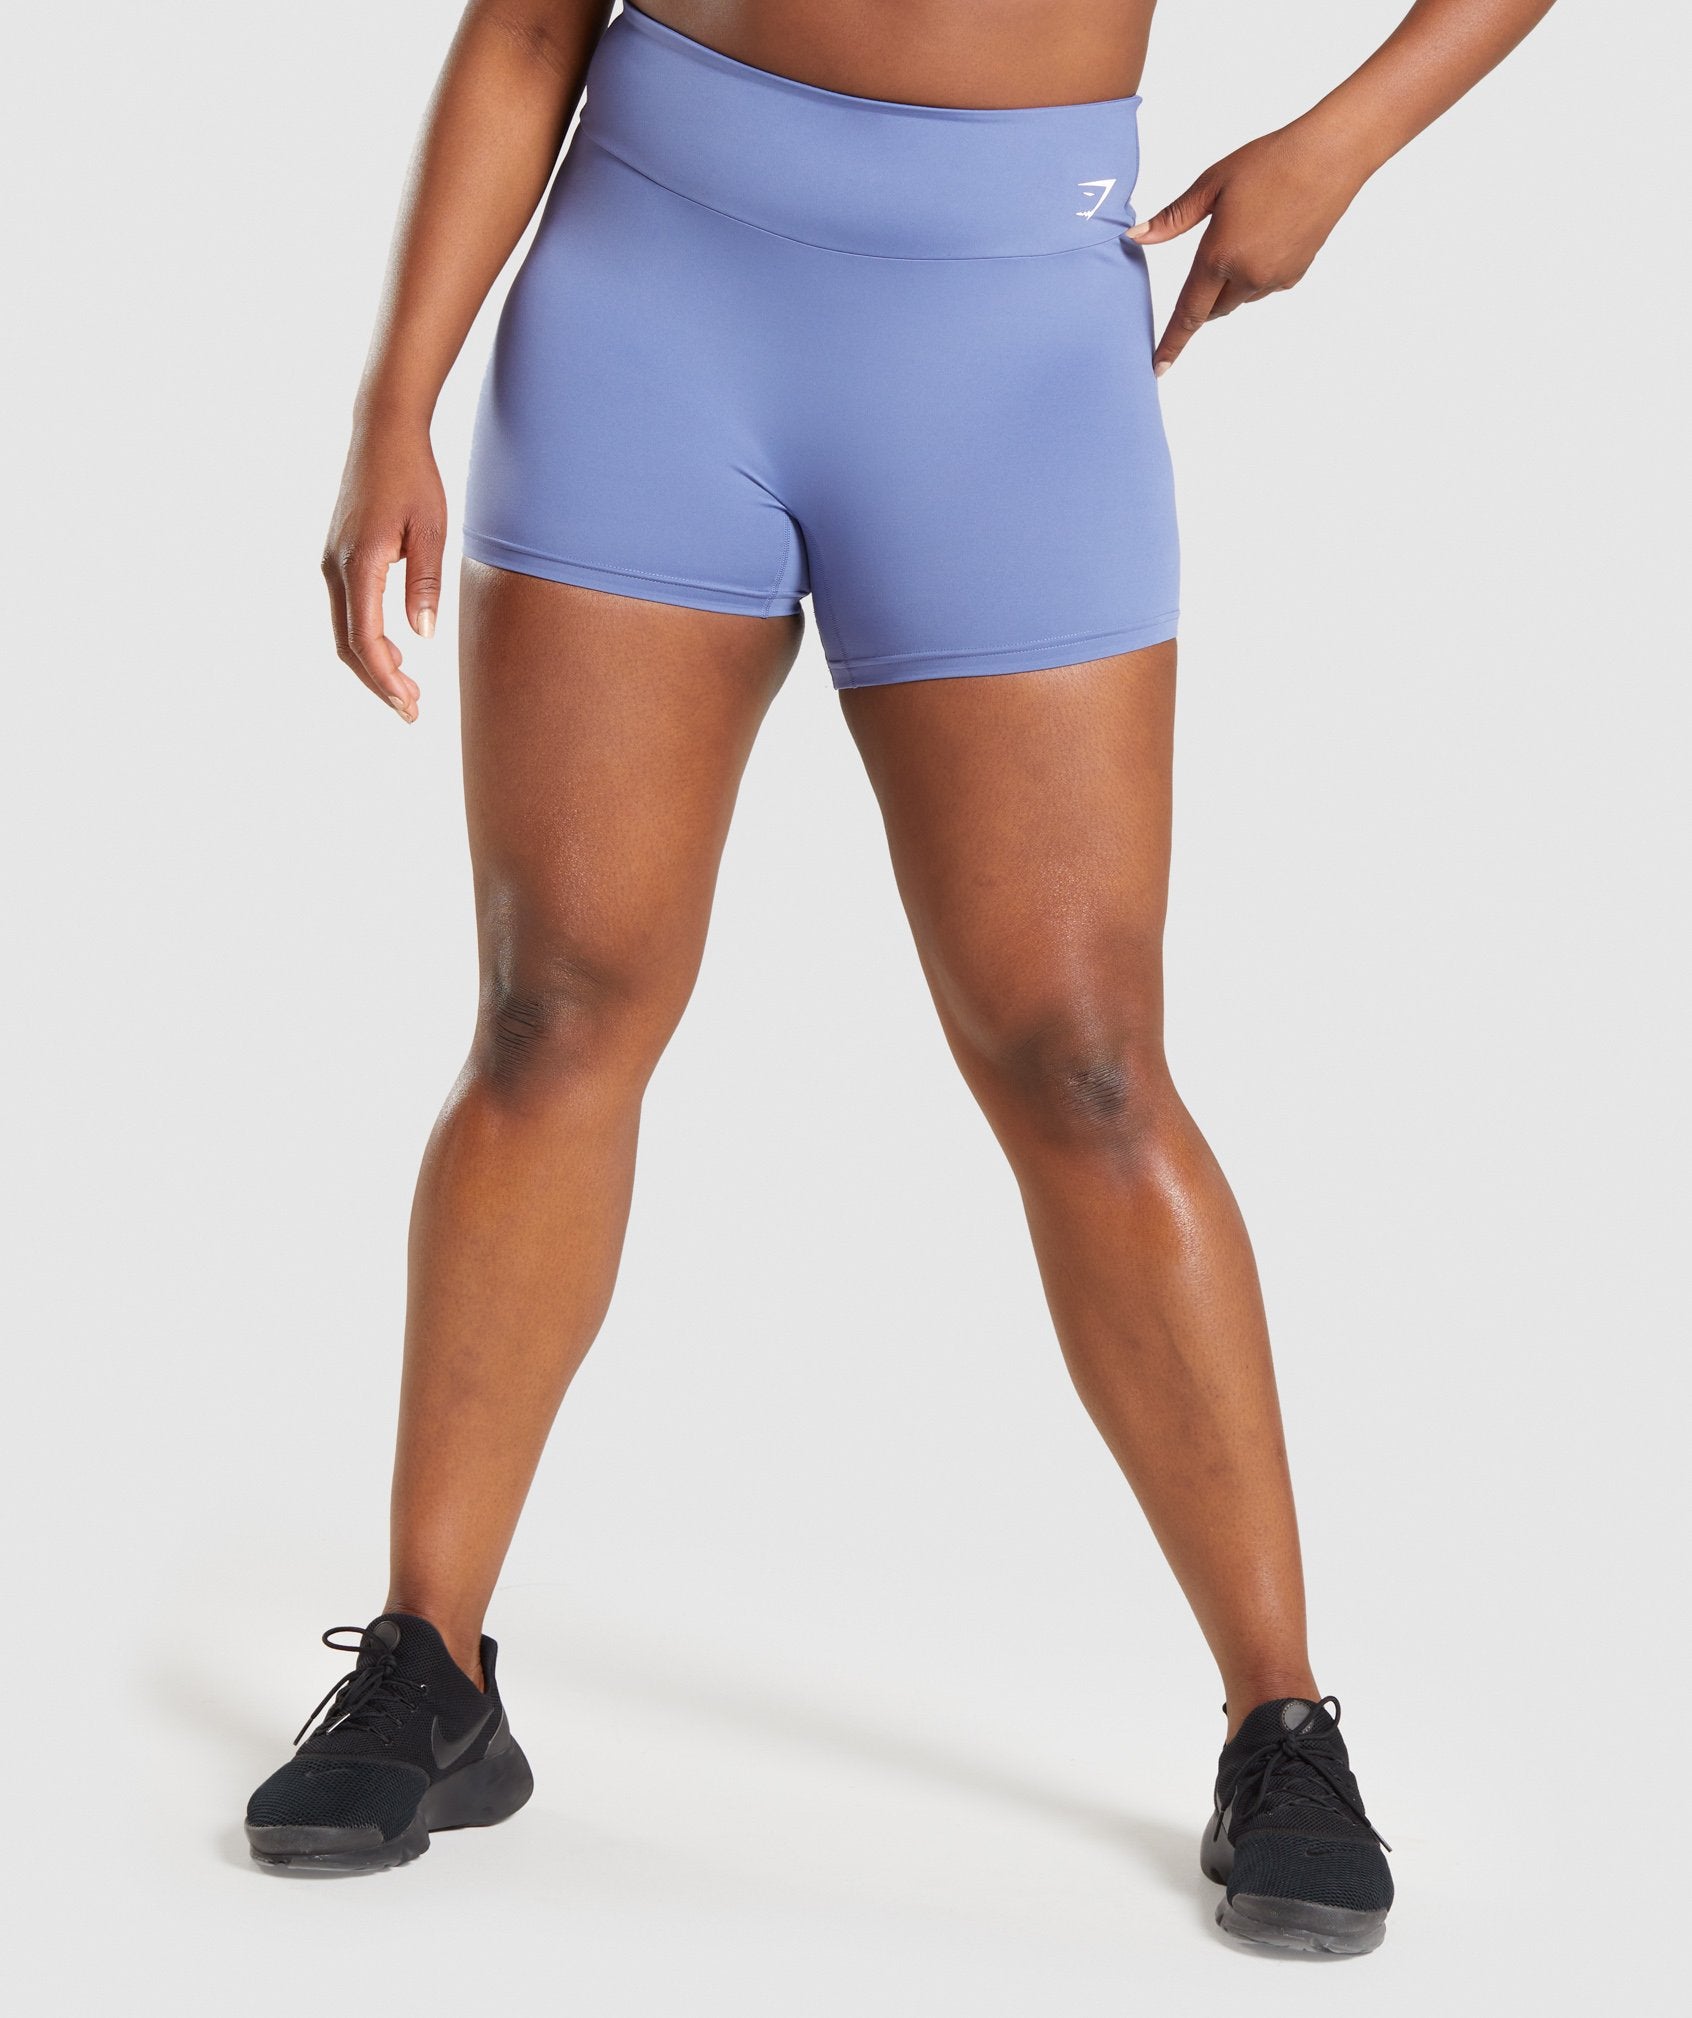 Gymshark Training Shorts - Blue – Client 446 100K products